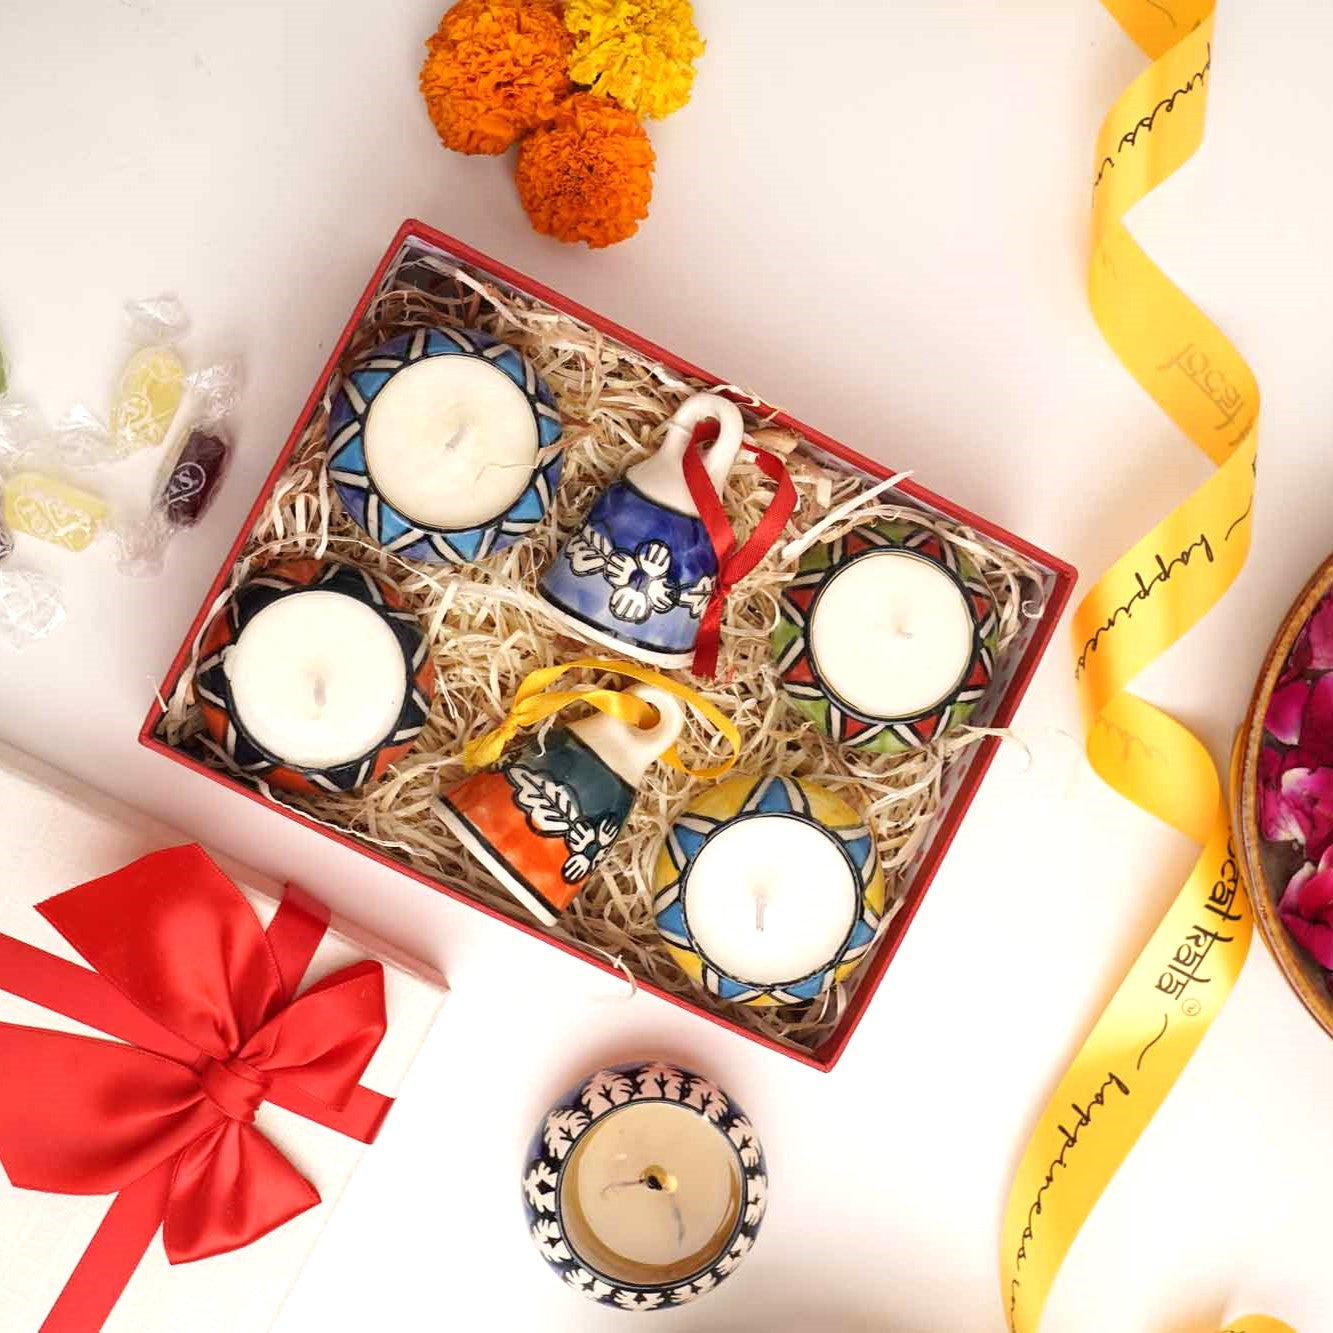 Diwali Gift Box - for the one who love cute little things